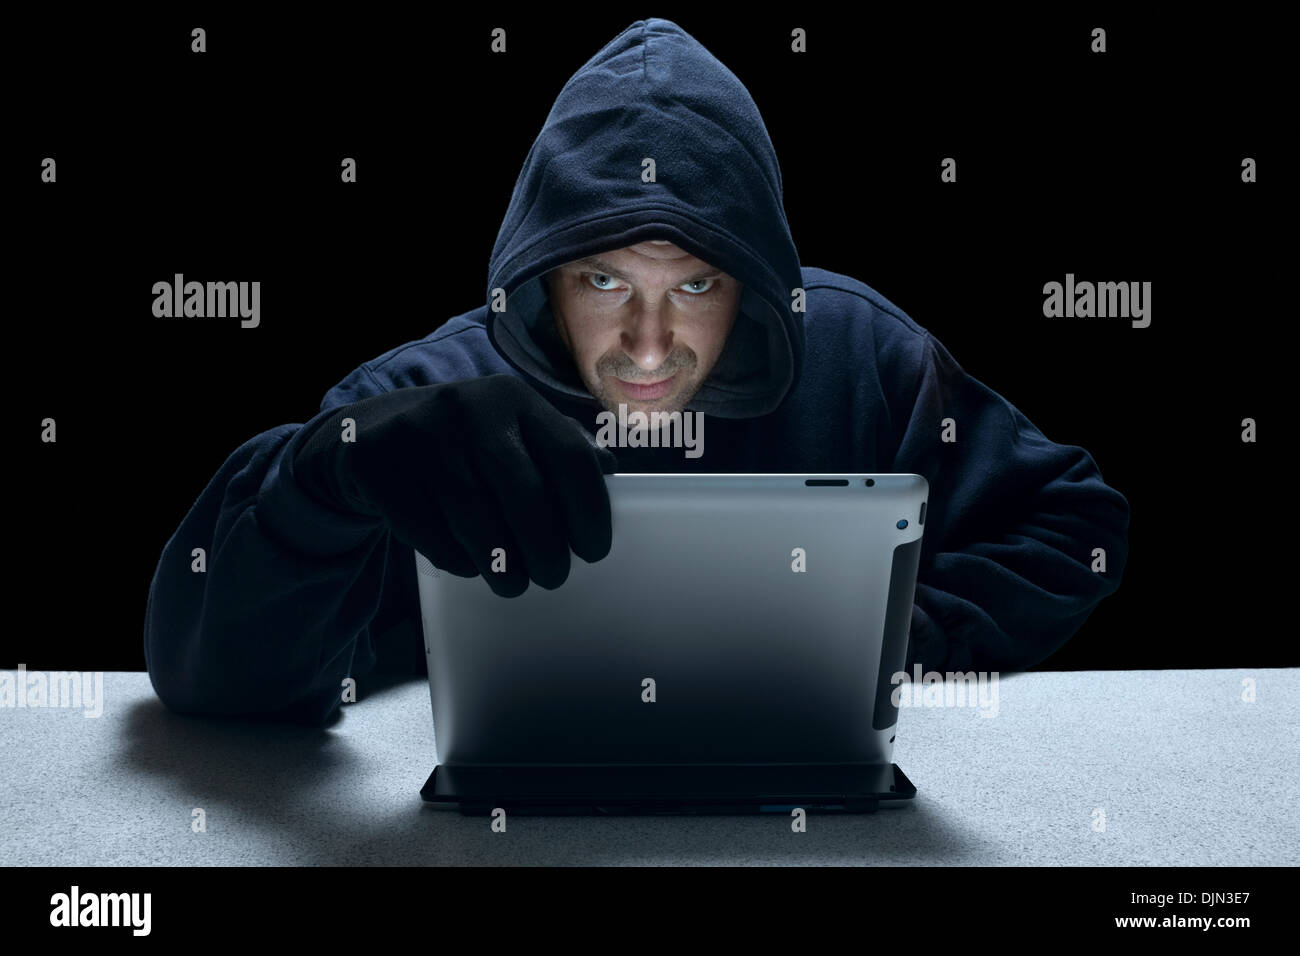 A hooded man using a tablet computer representing a cyber criminal. Stock Photo